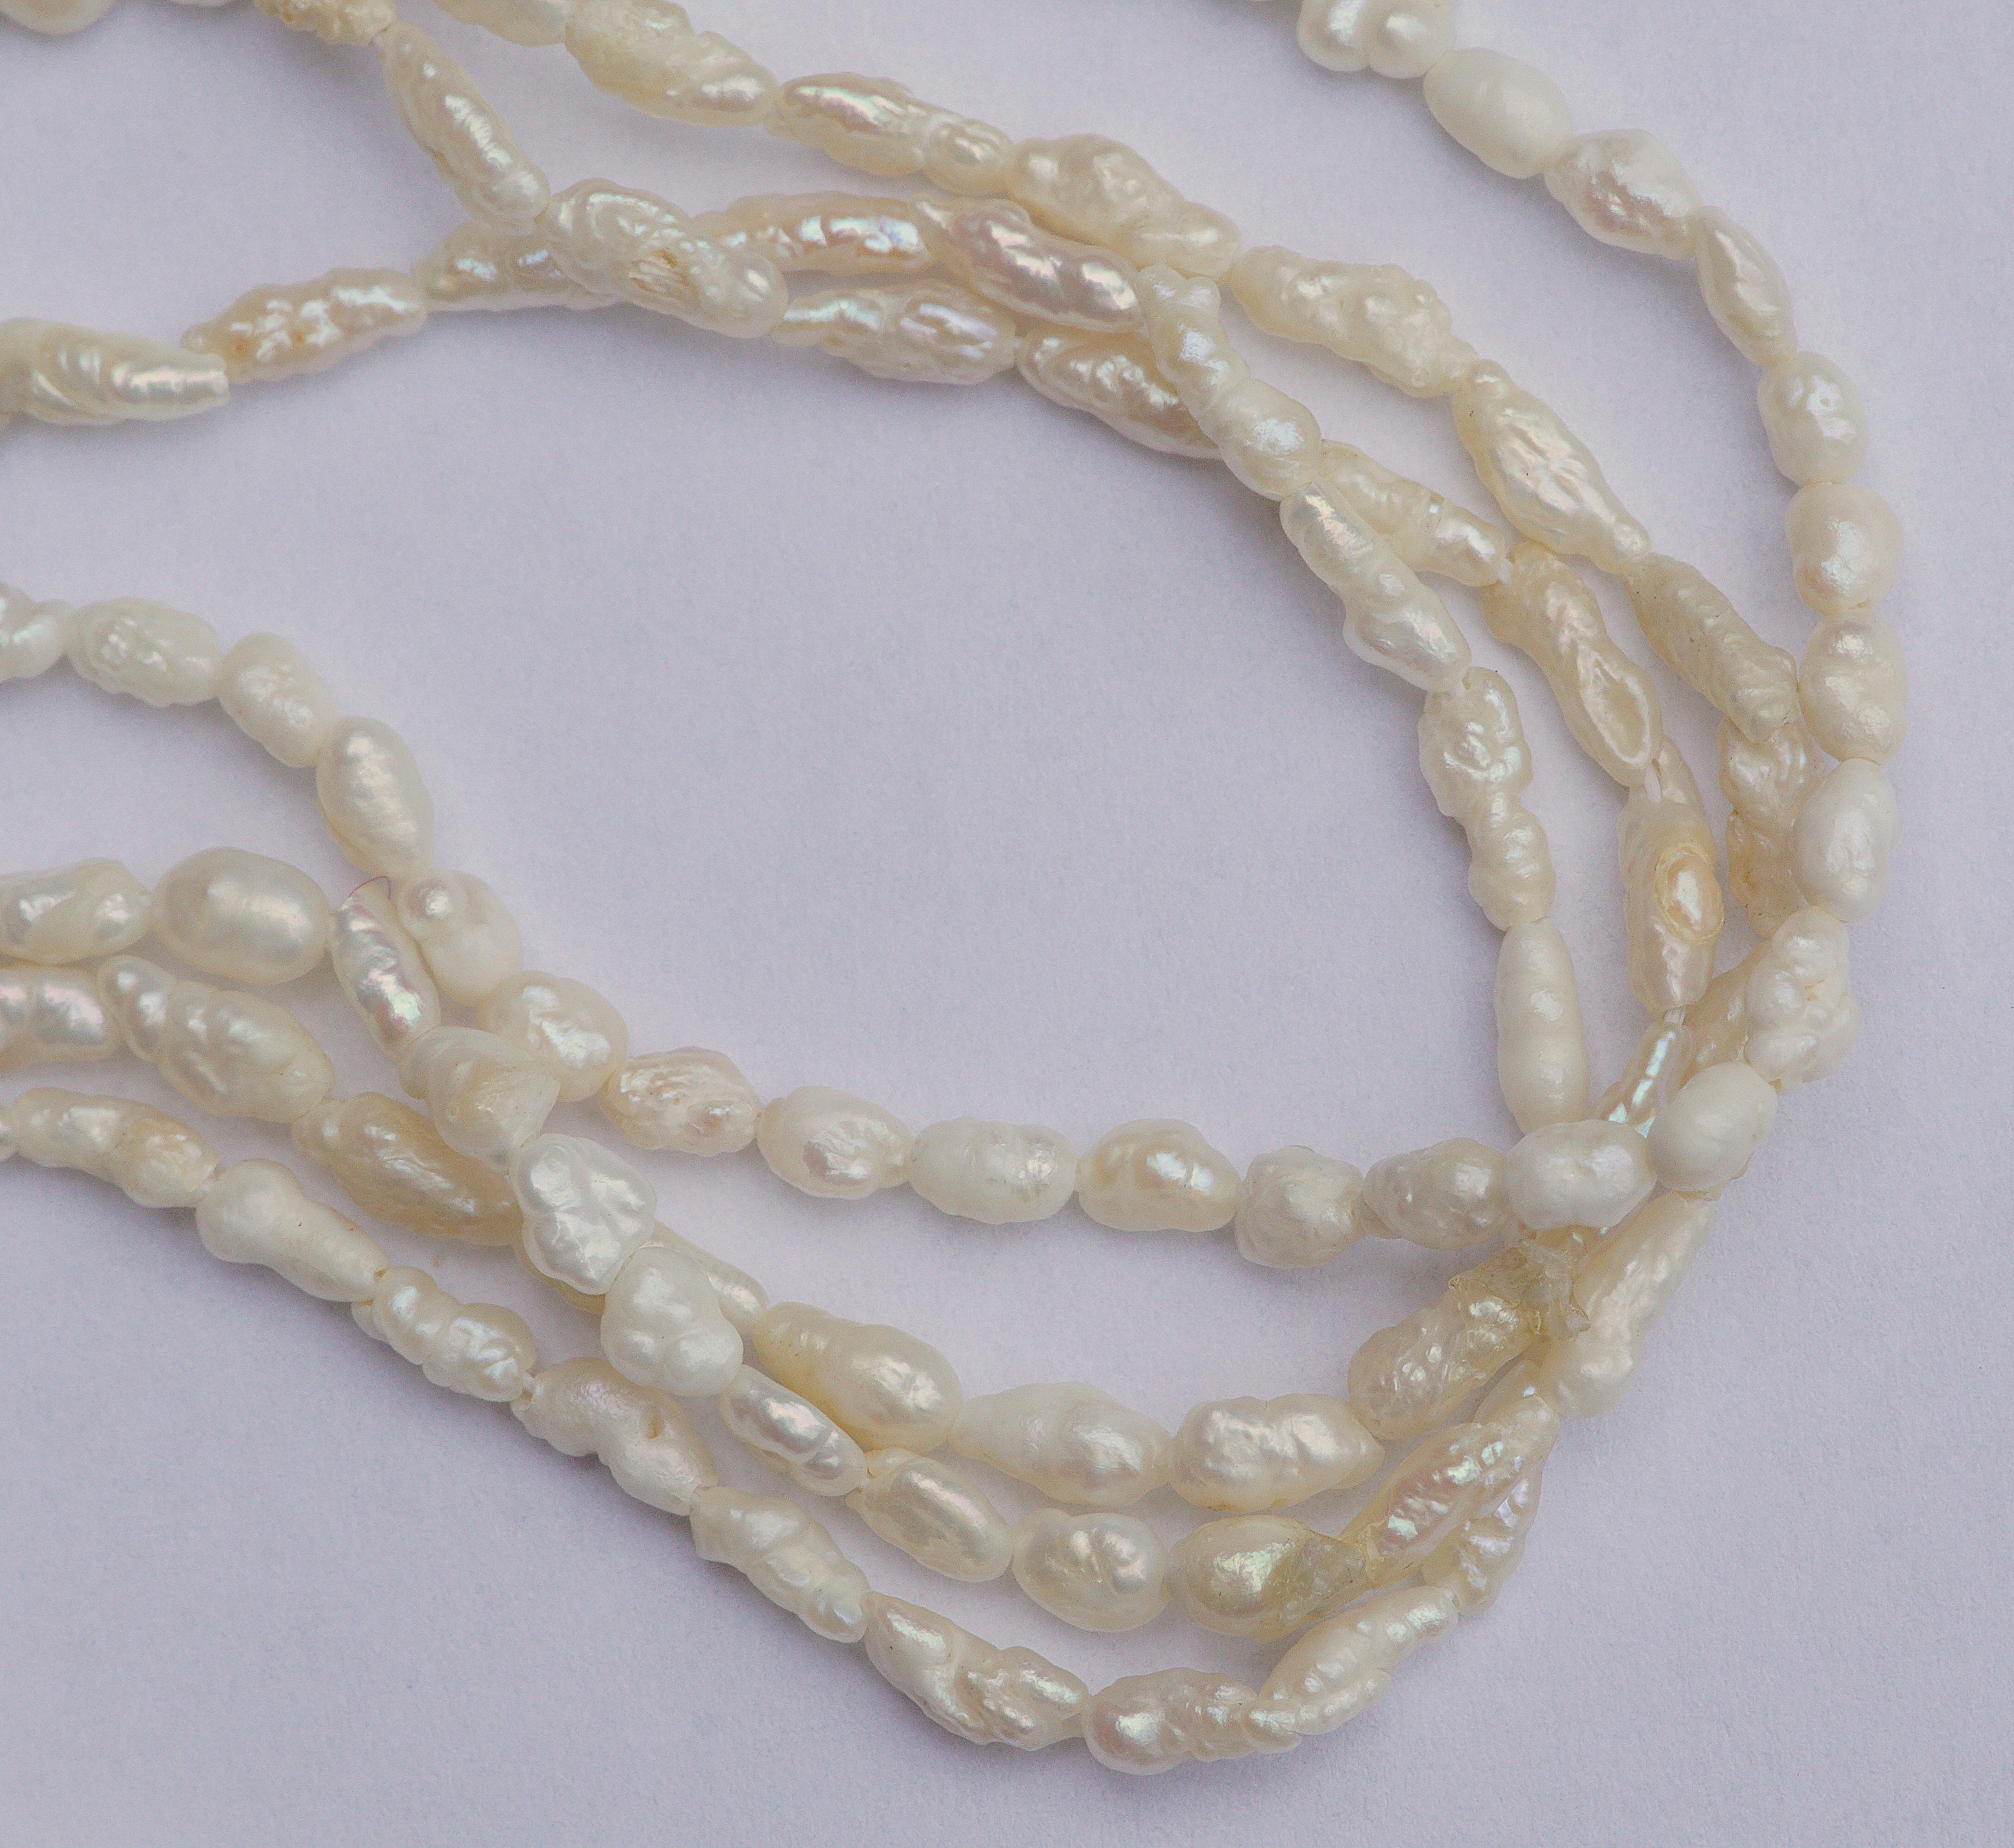 Four original strands of vintage baroque genuine rice pearls, circa 1970s. Length 91cms, 35.83 inches, they are a lovely ivory colour. The strands are not joined, and so can be worn as few or as many as you like.

Each pearl is approx. 3mm, .12 inch